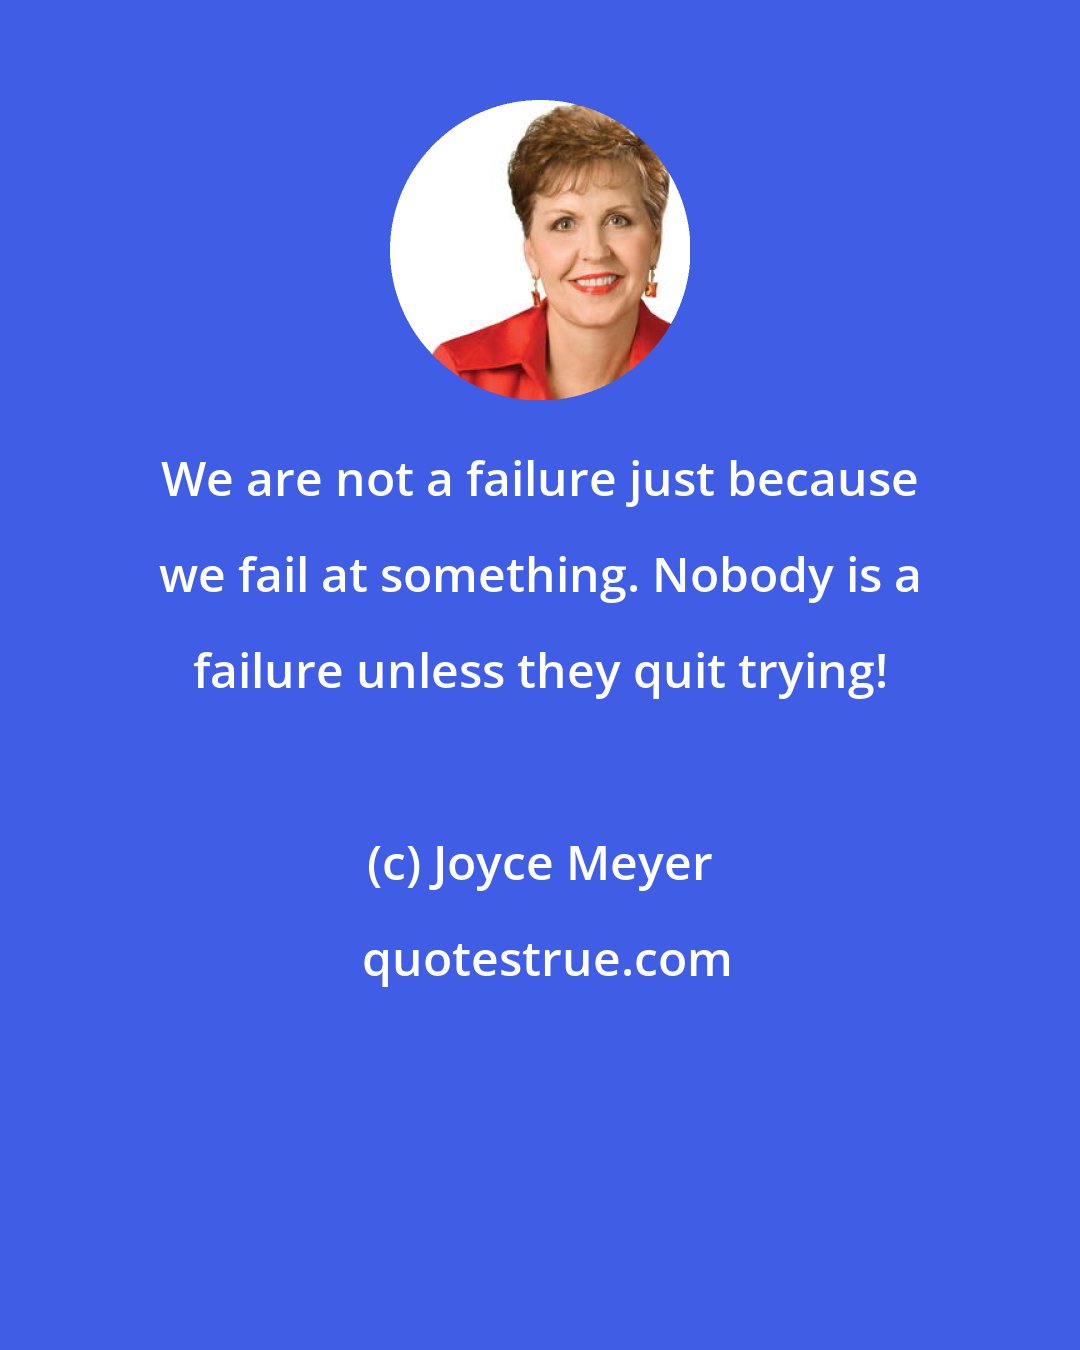 Joyce Meyer: We are not a failure just because we fail at something. Nobody is a failure unless they quit trying!